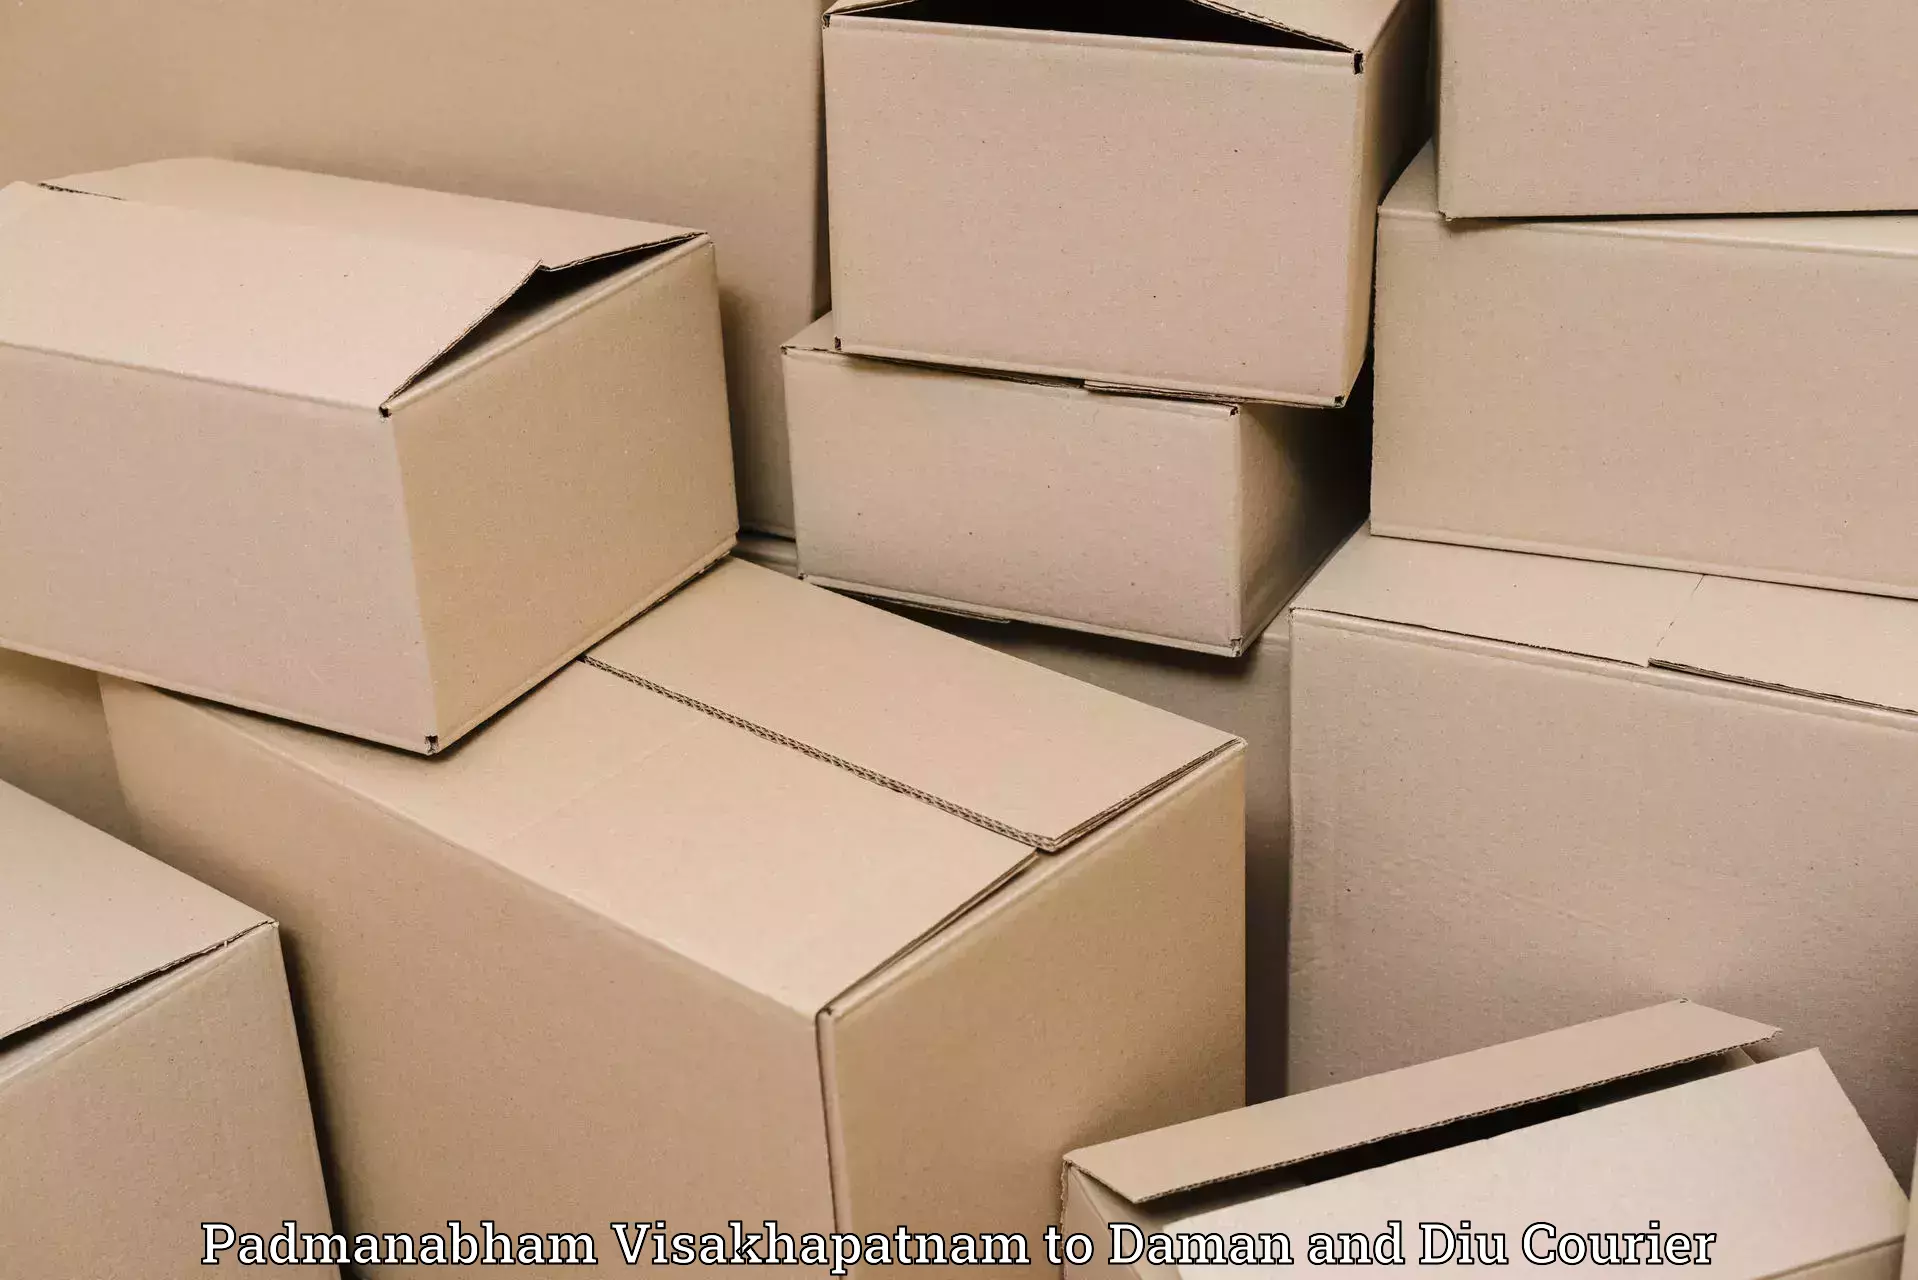 Professional courier services in Padmanabham Visakhapatnam to Daman and Diu